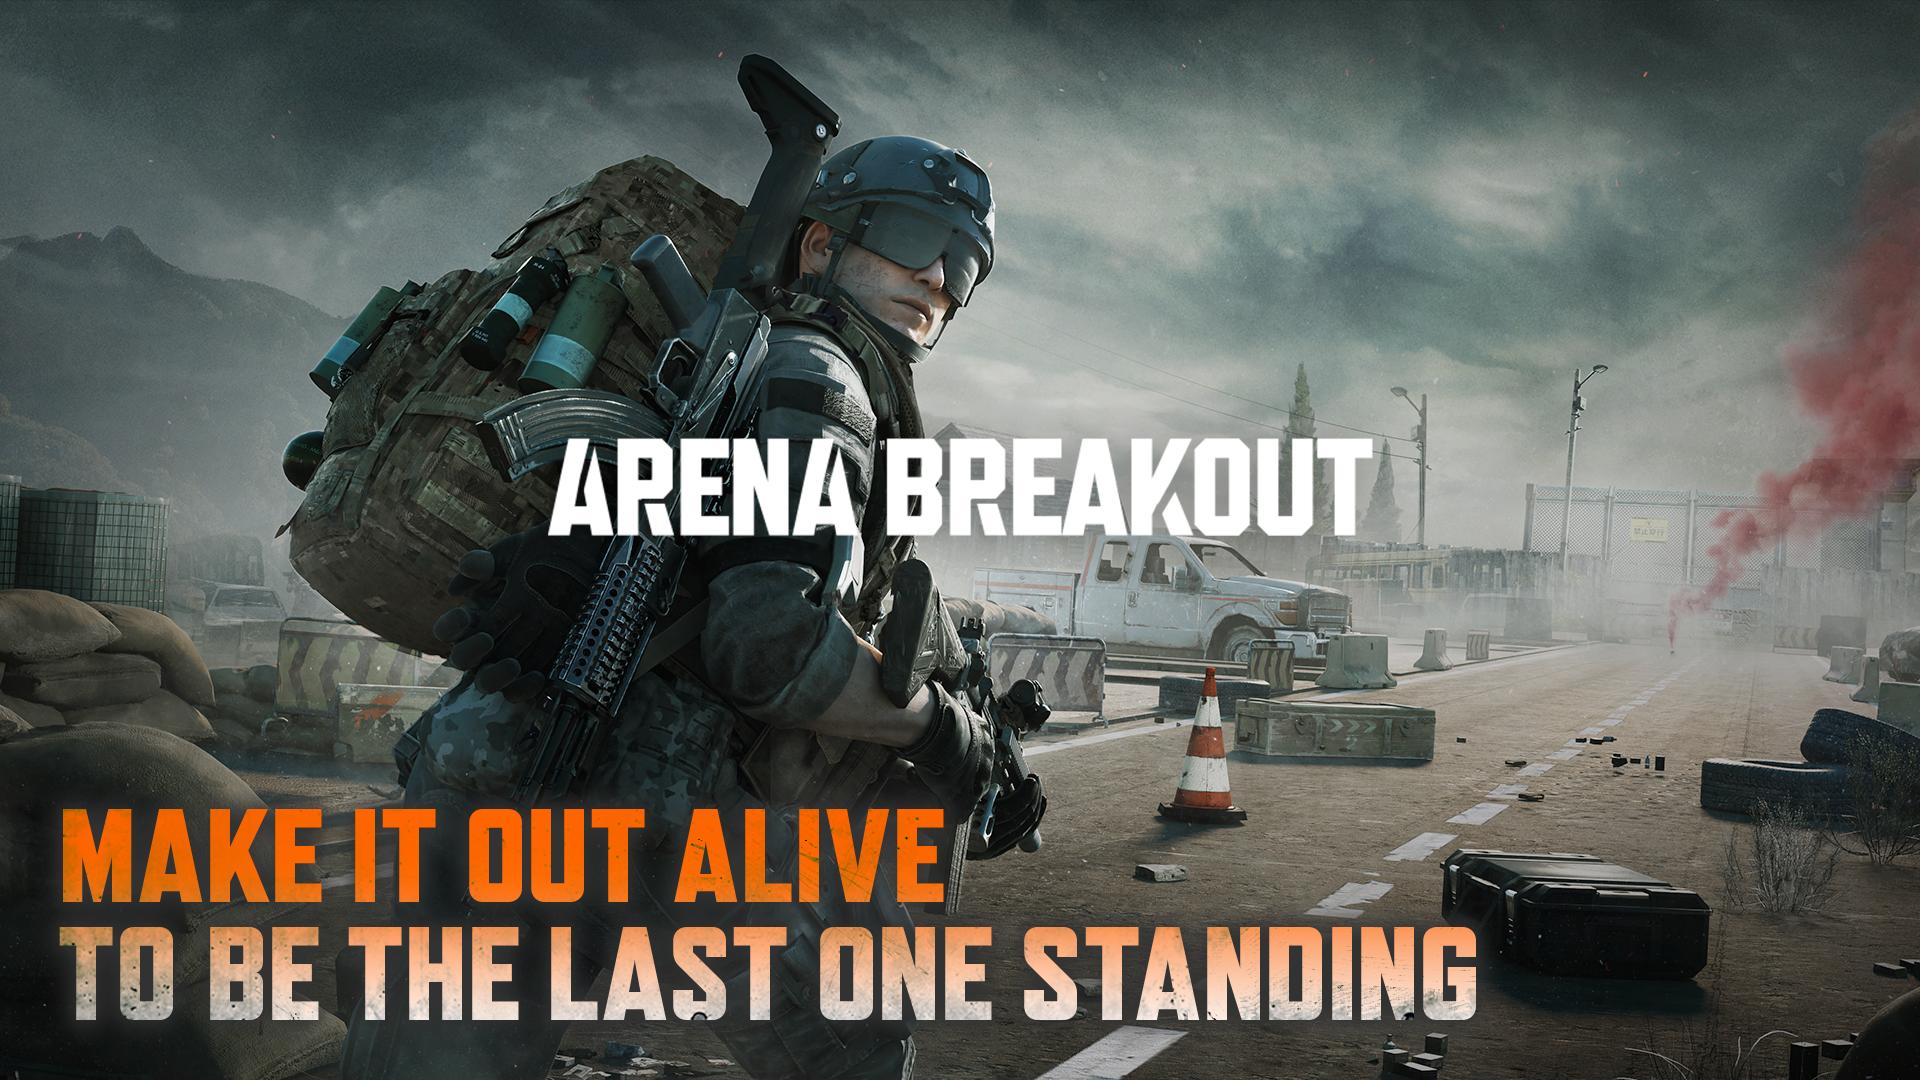 Arena Breakout Review: The Coolest FPS Shooter Ever